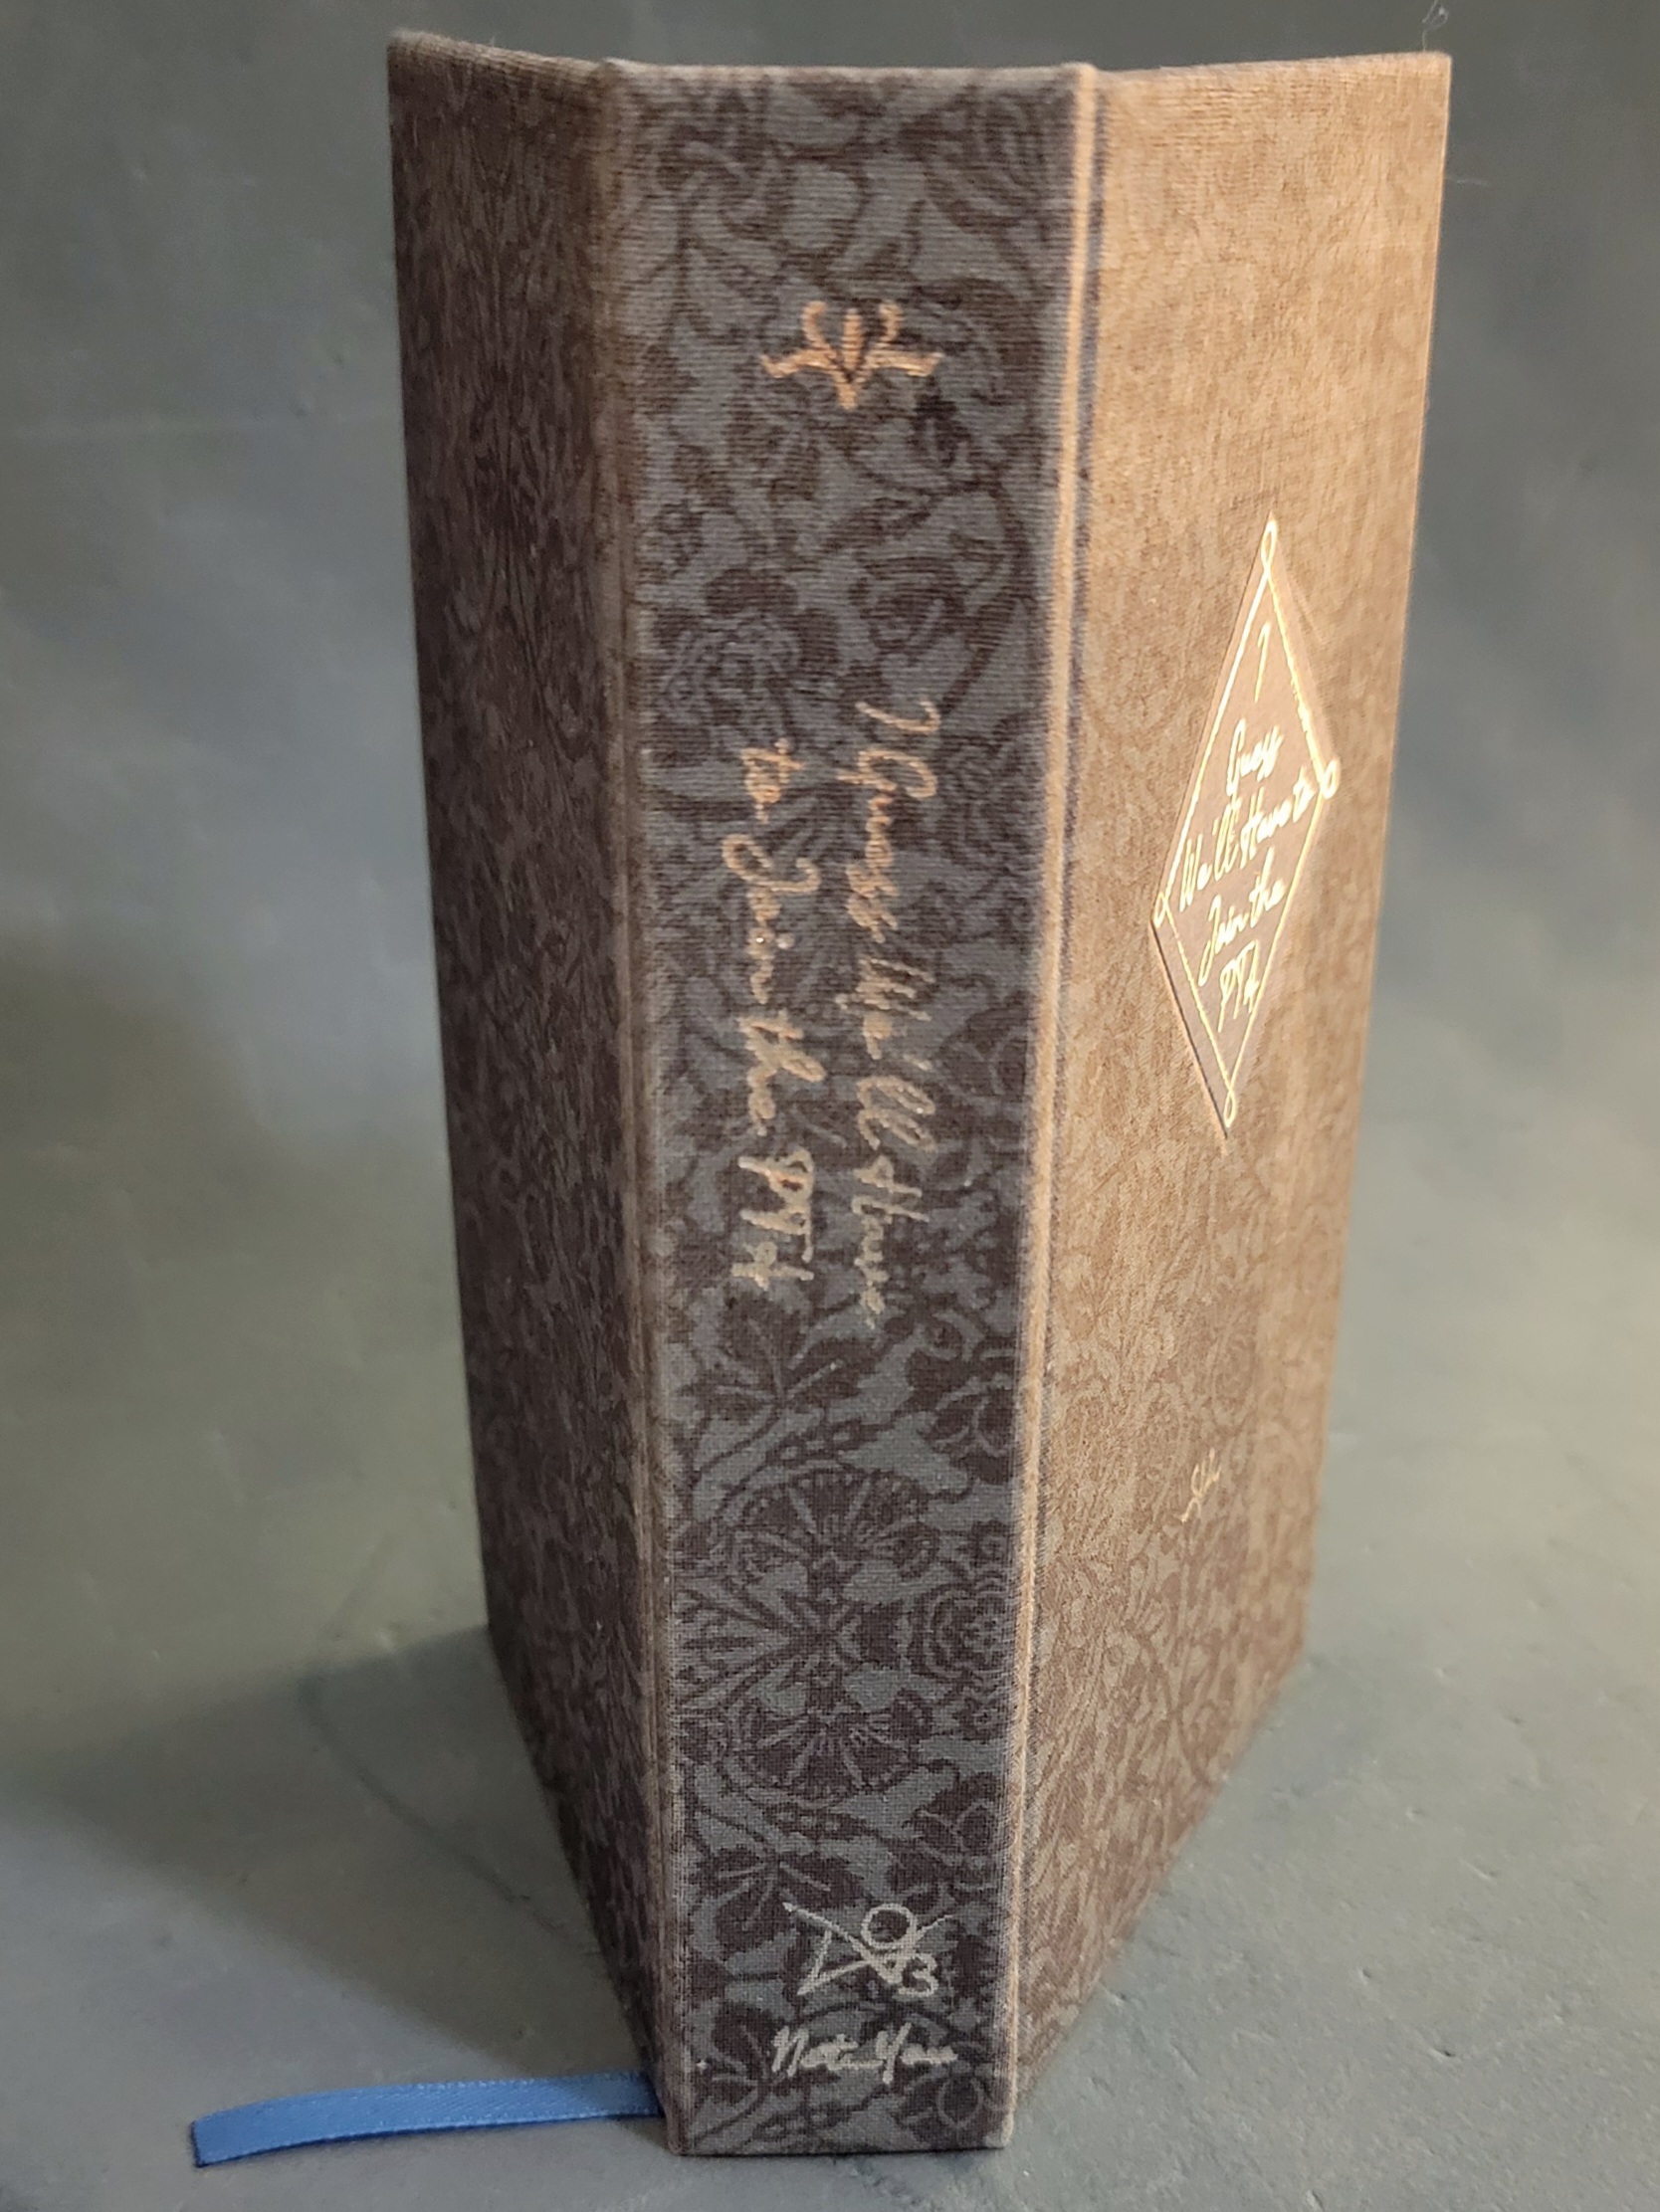 book with blue spine and foiled title